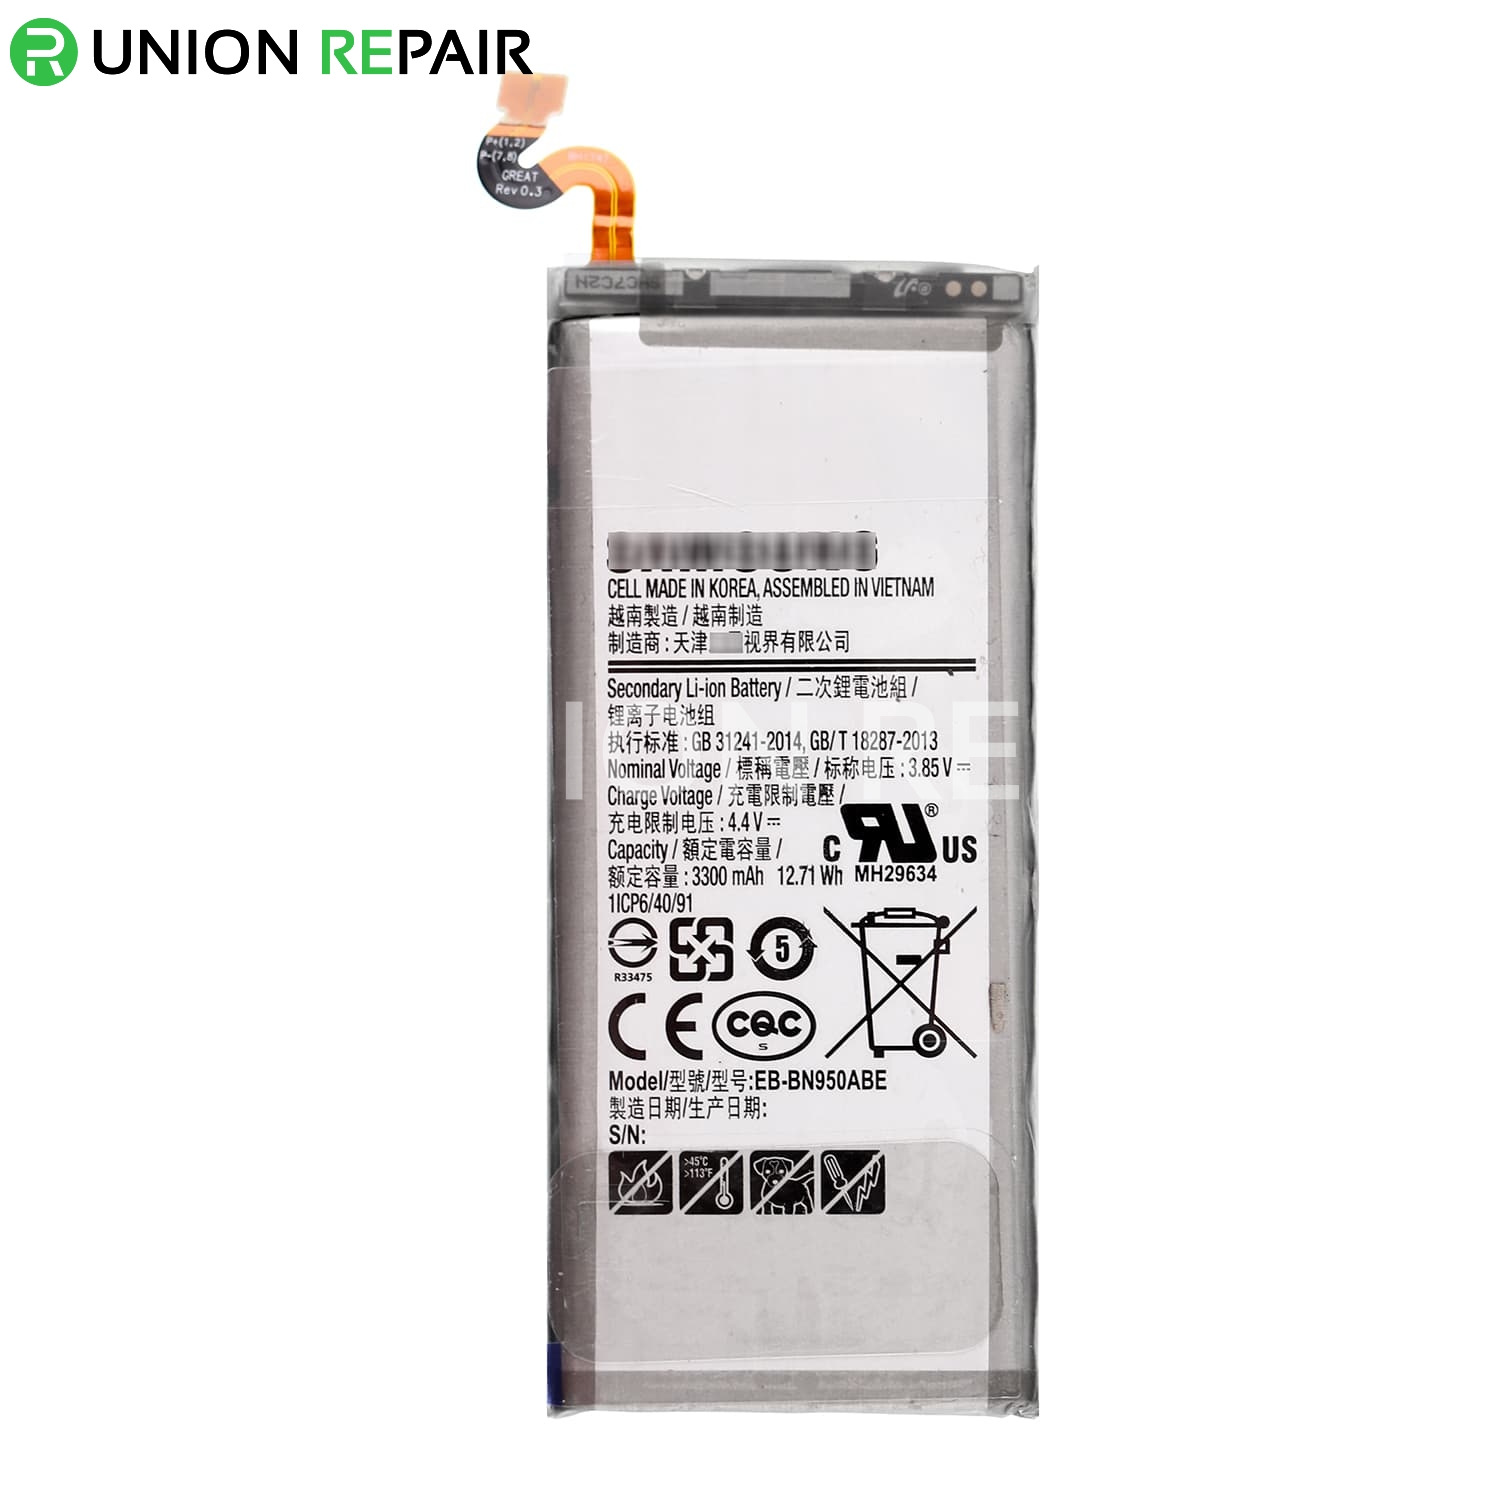 You also get a full ONE YEAR Money Back Guarantee on the battery when you purchase Full 1 Yr.Warranty · Paypal Verified · How-to Video IncludedTypes: Battery Replacement Kits, Tools, Video Instructions.